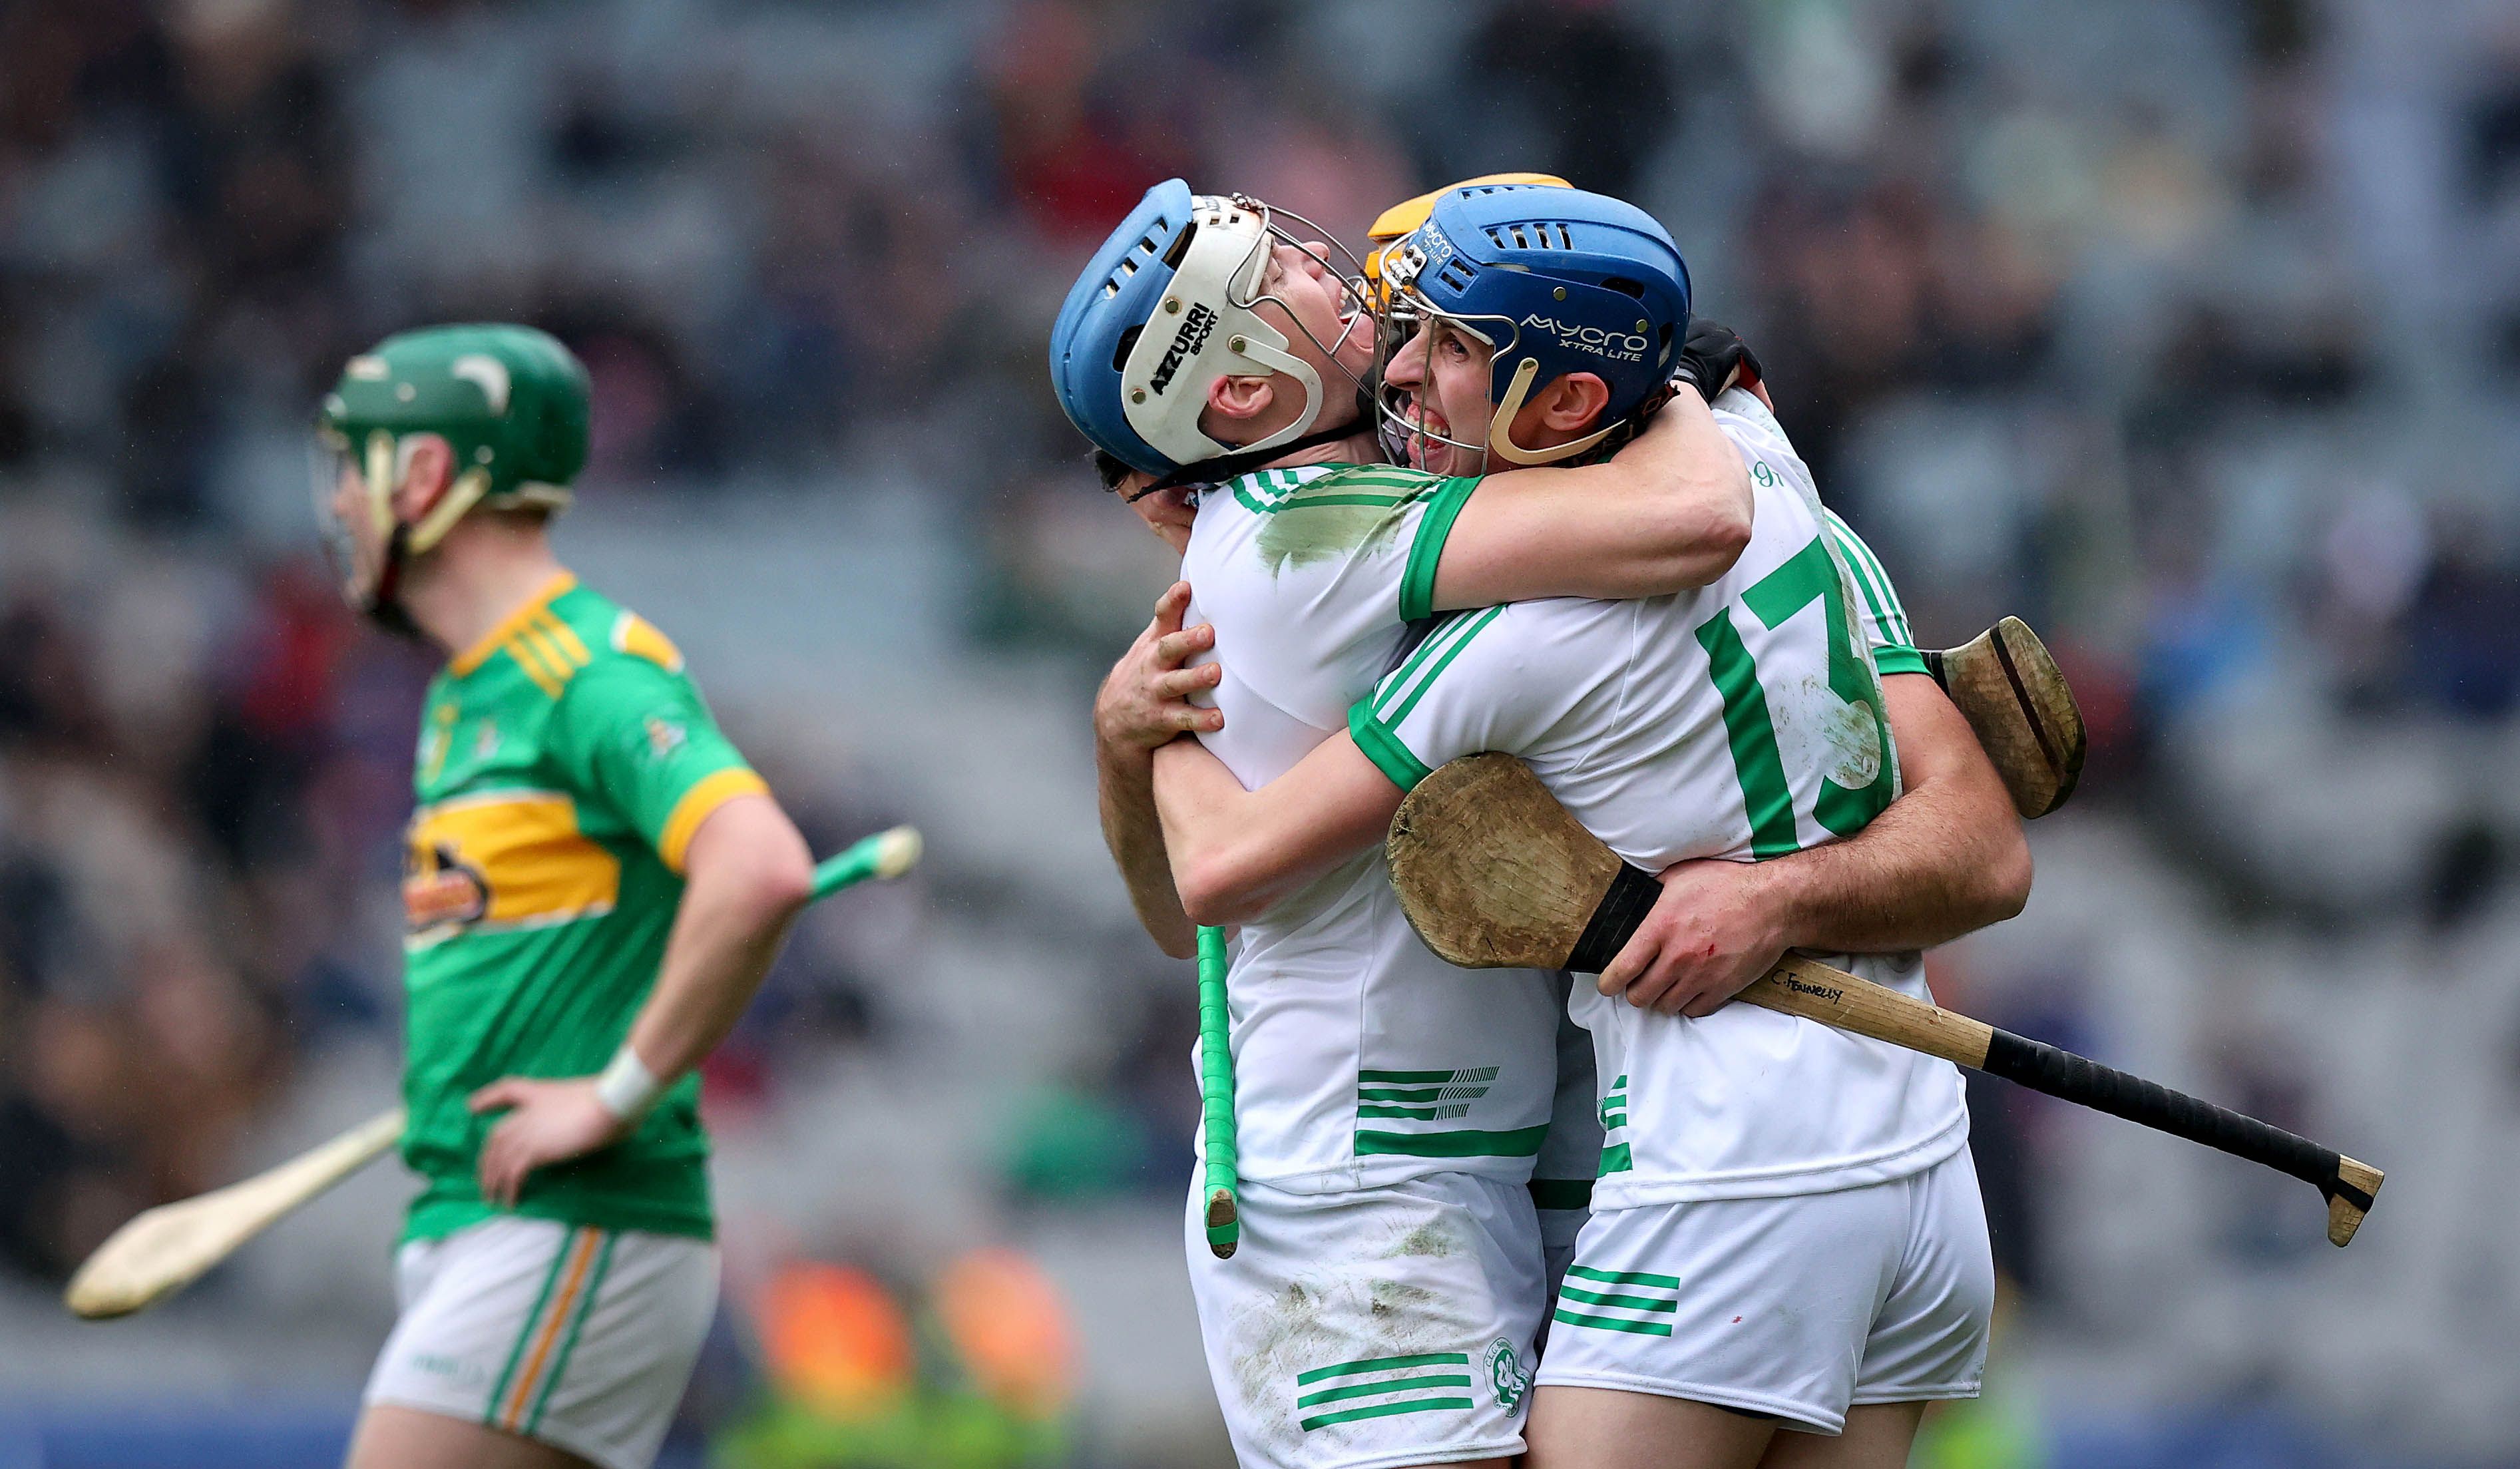 TJ Reid, Colin Fennelly and Eoin Kenneally celebrate at the final whistle having beaten Dunloy to the ALl-Ireland Club title at Croke Park on Sunday 